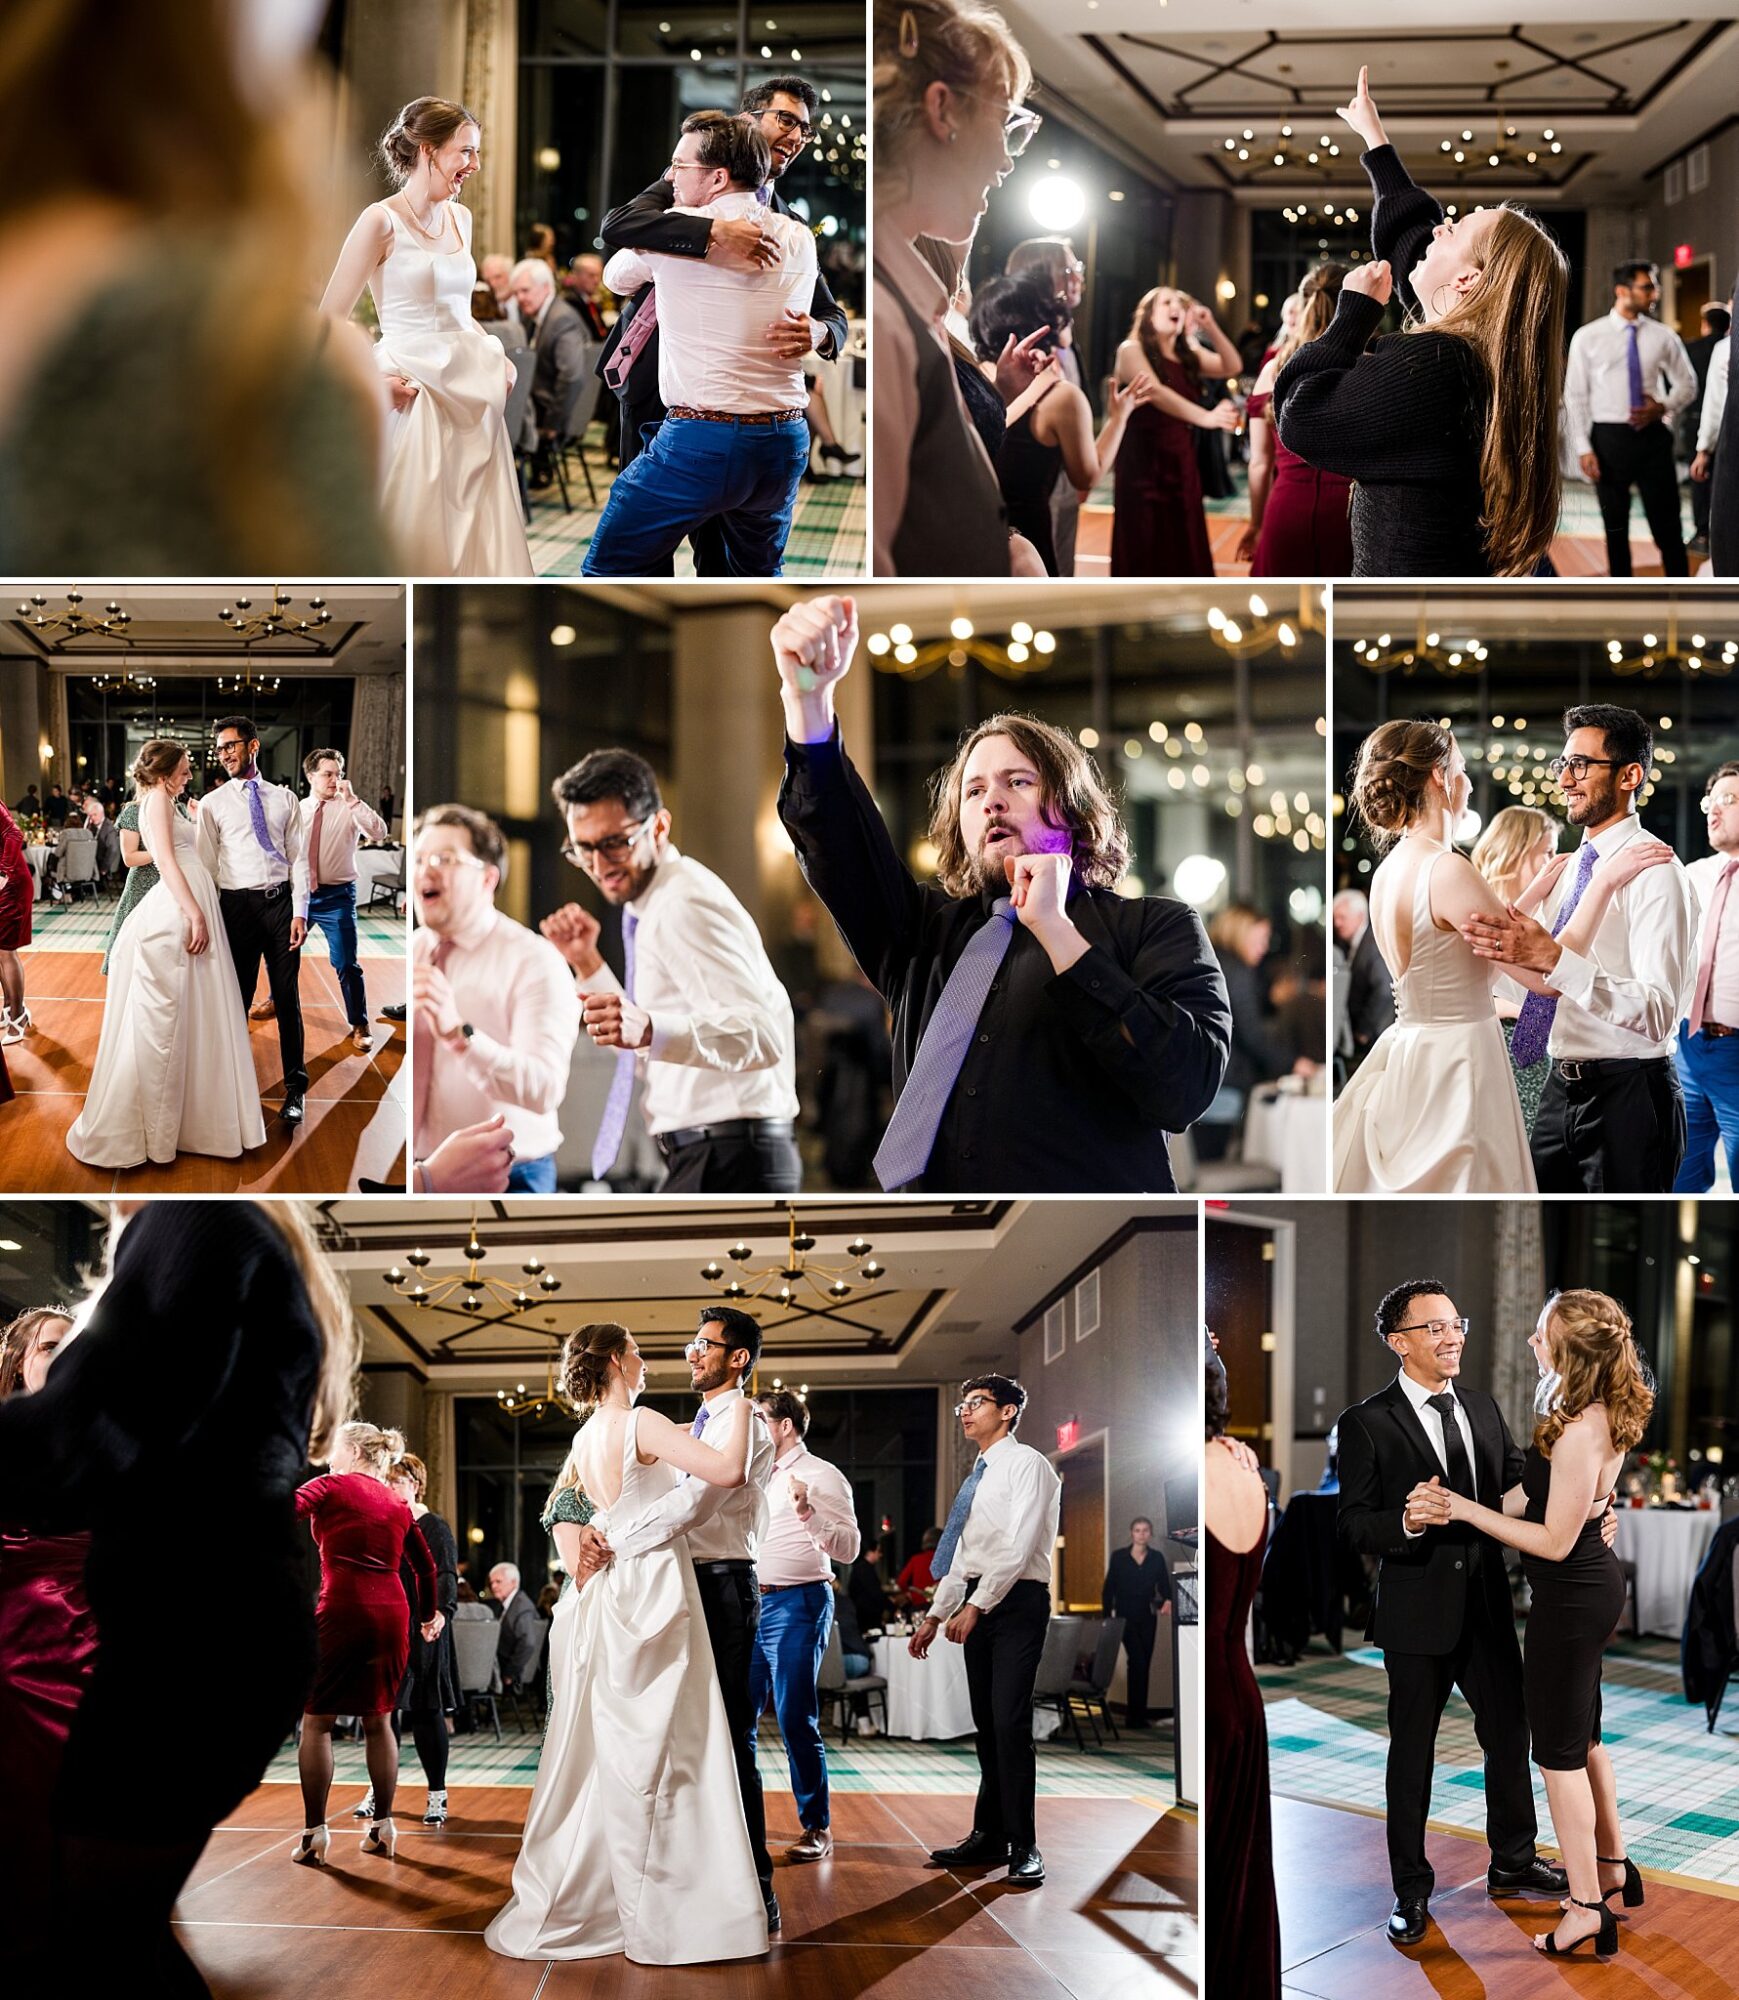 People dancing at a wedding in the ballroom of the Graduate Hotel, East Lansing, Michigan